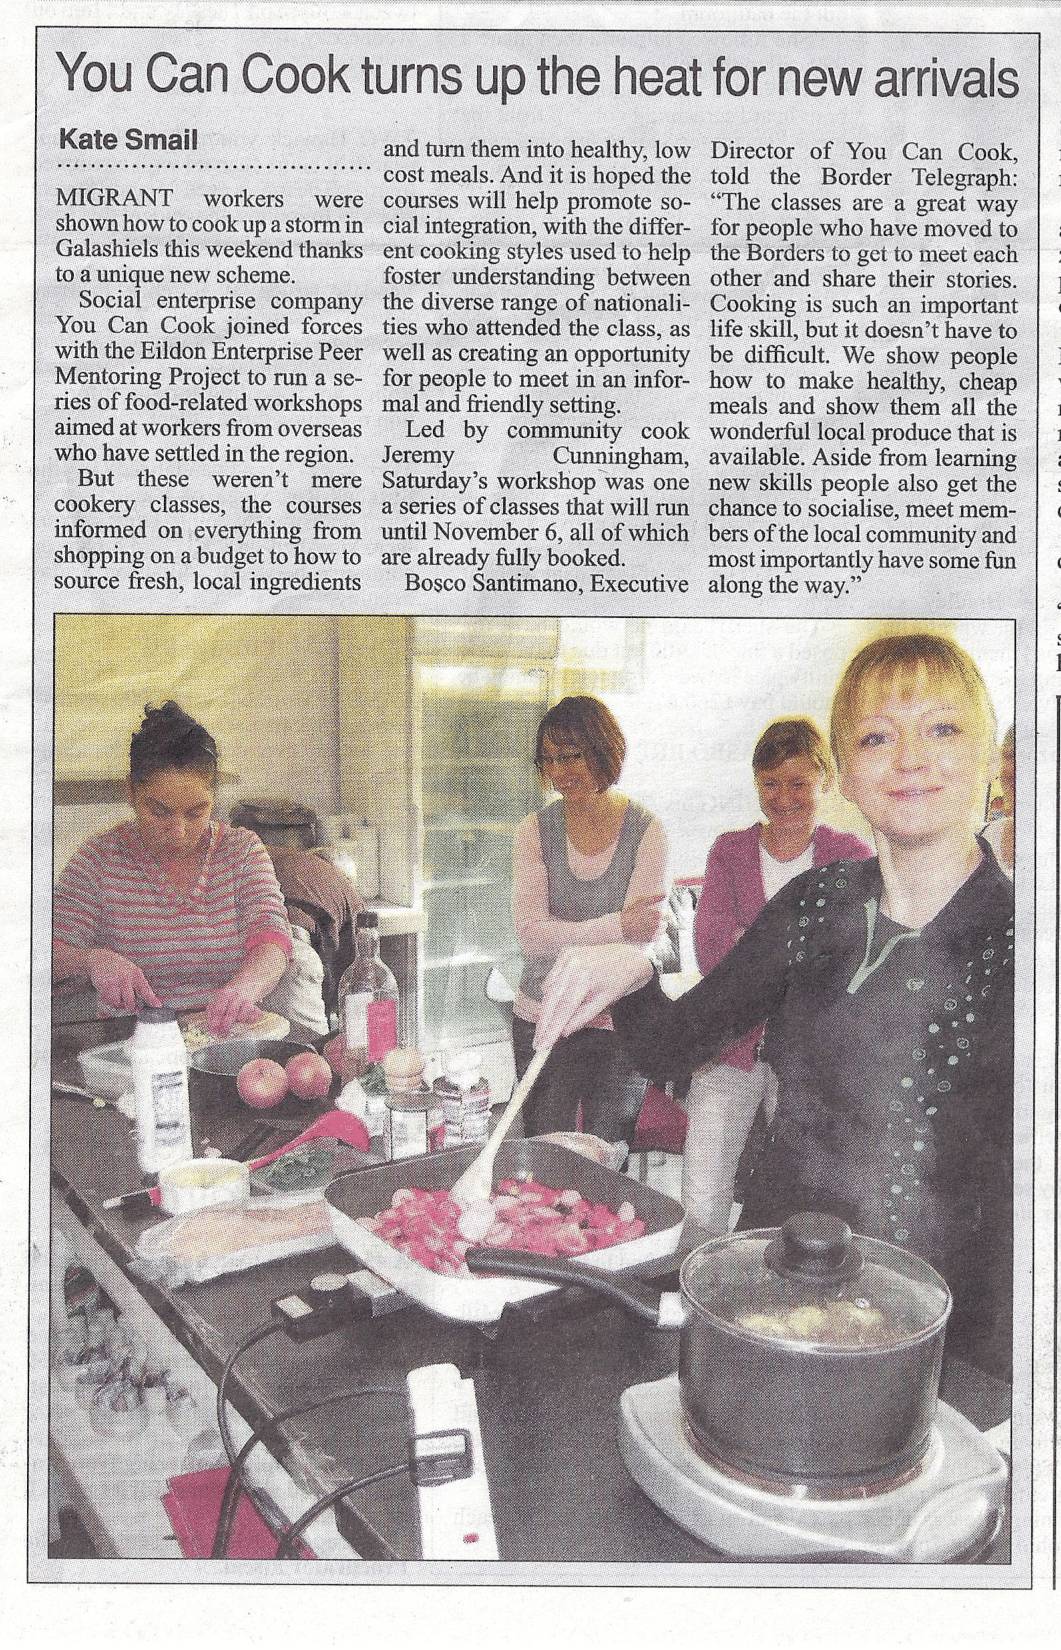 Press Clipping: You Can Cook turns up the heat for new arrivals